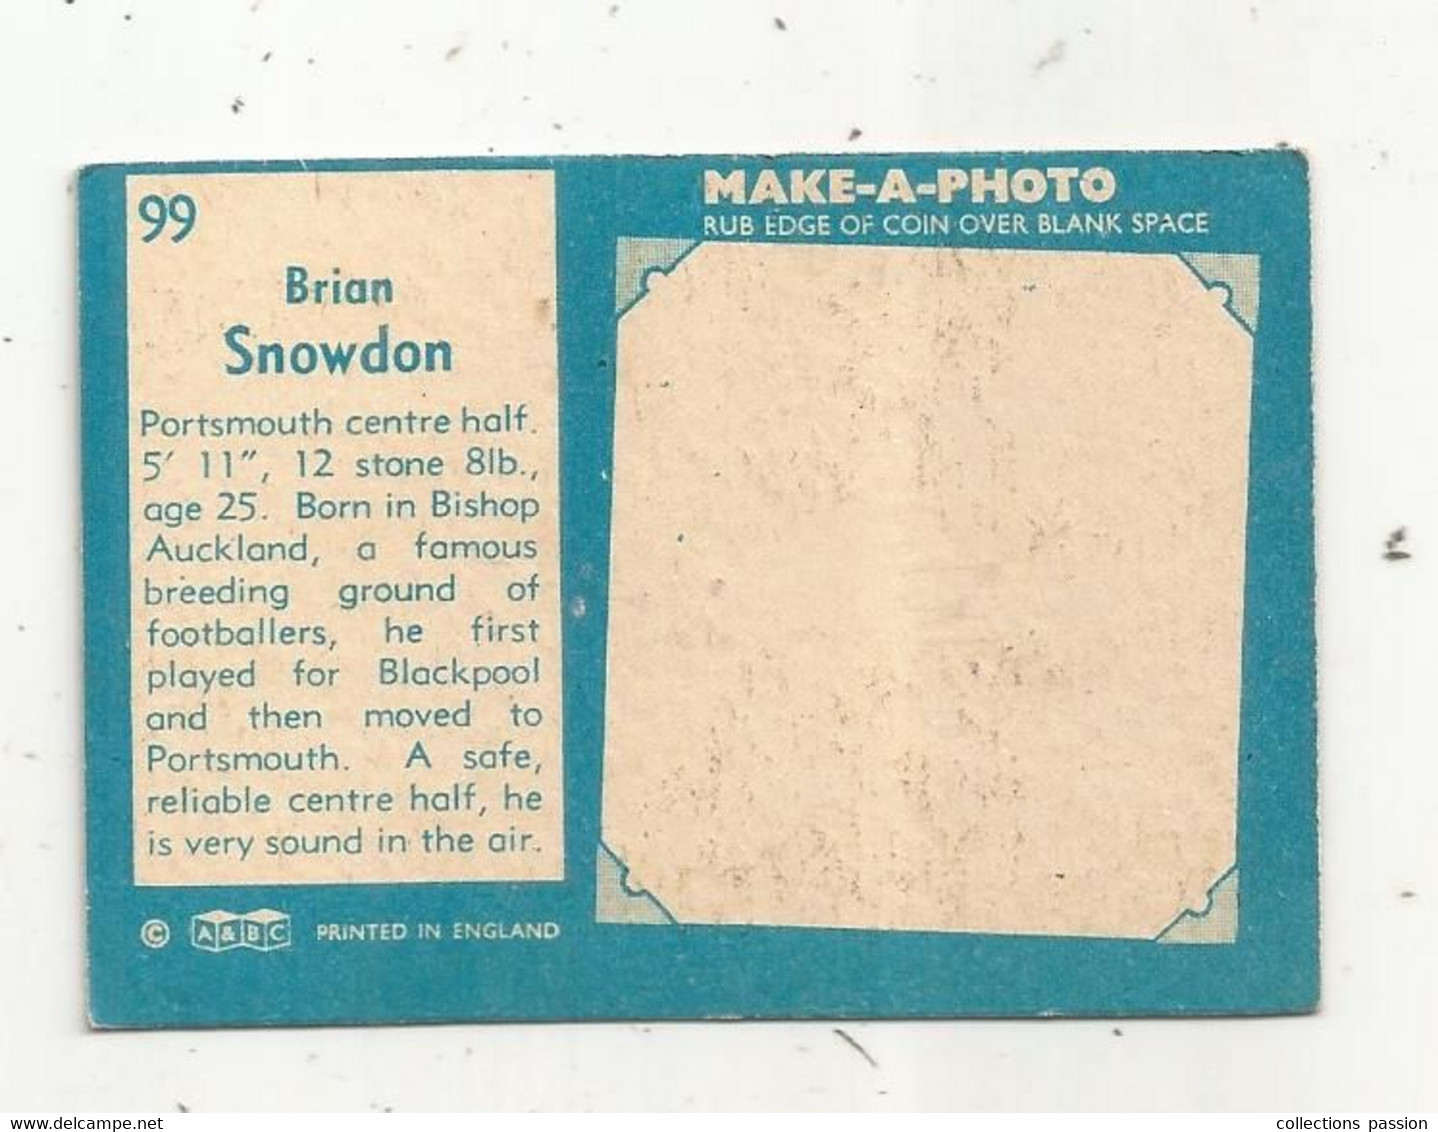 Trading Card , A&BC , England, Chewing Gum, Serie : Make A Photo , Année 60 , N° 99 , BRIAN SNOWDON , Portsmouth - Trading Cards